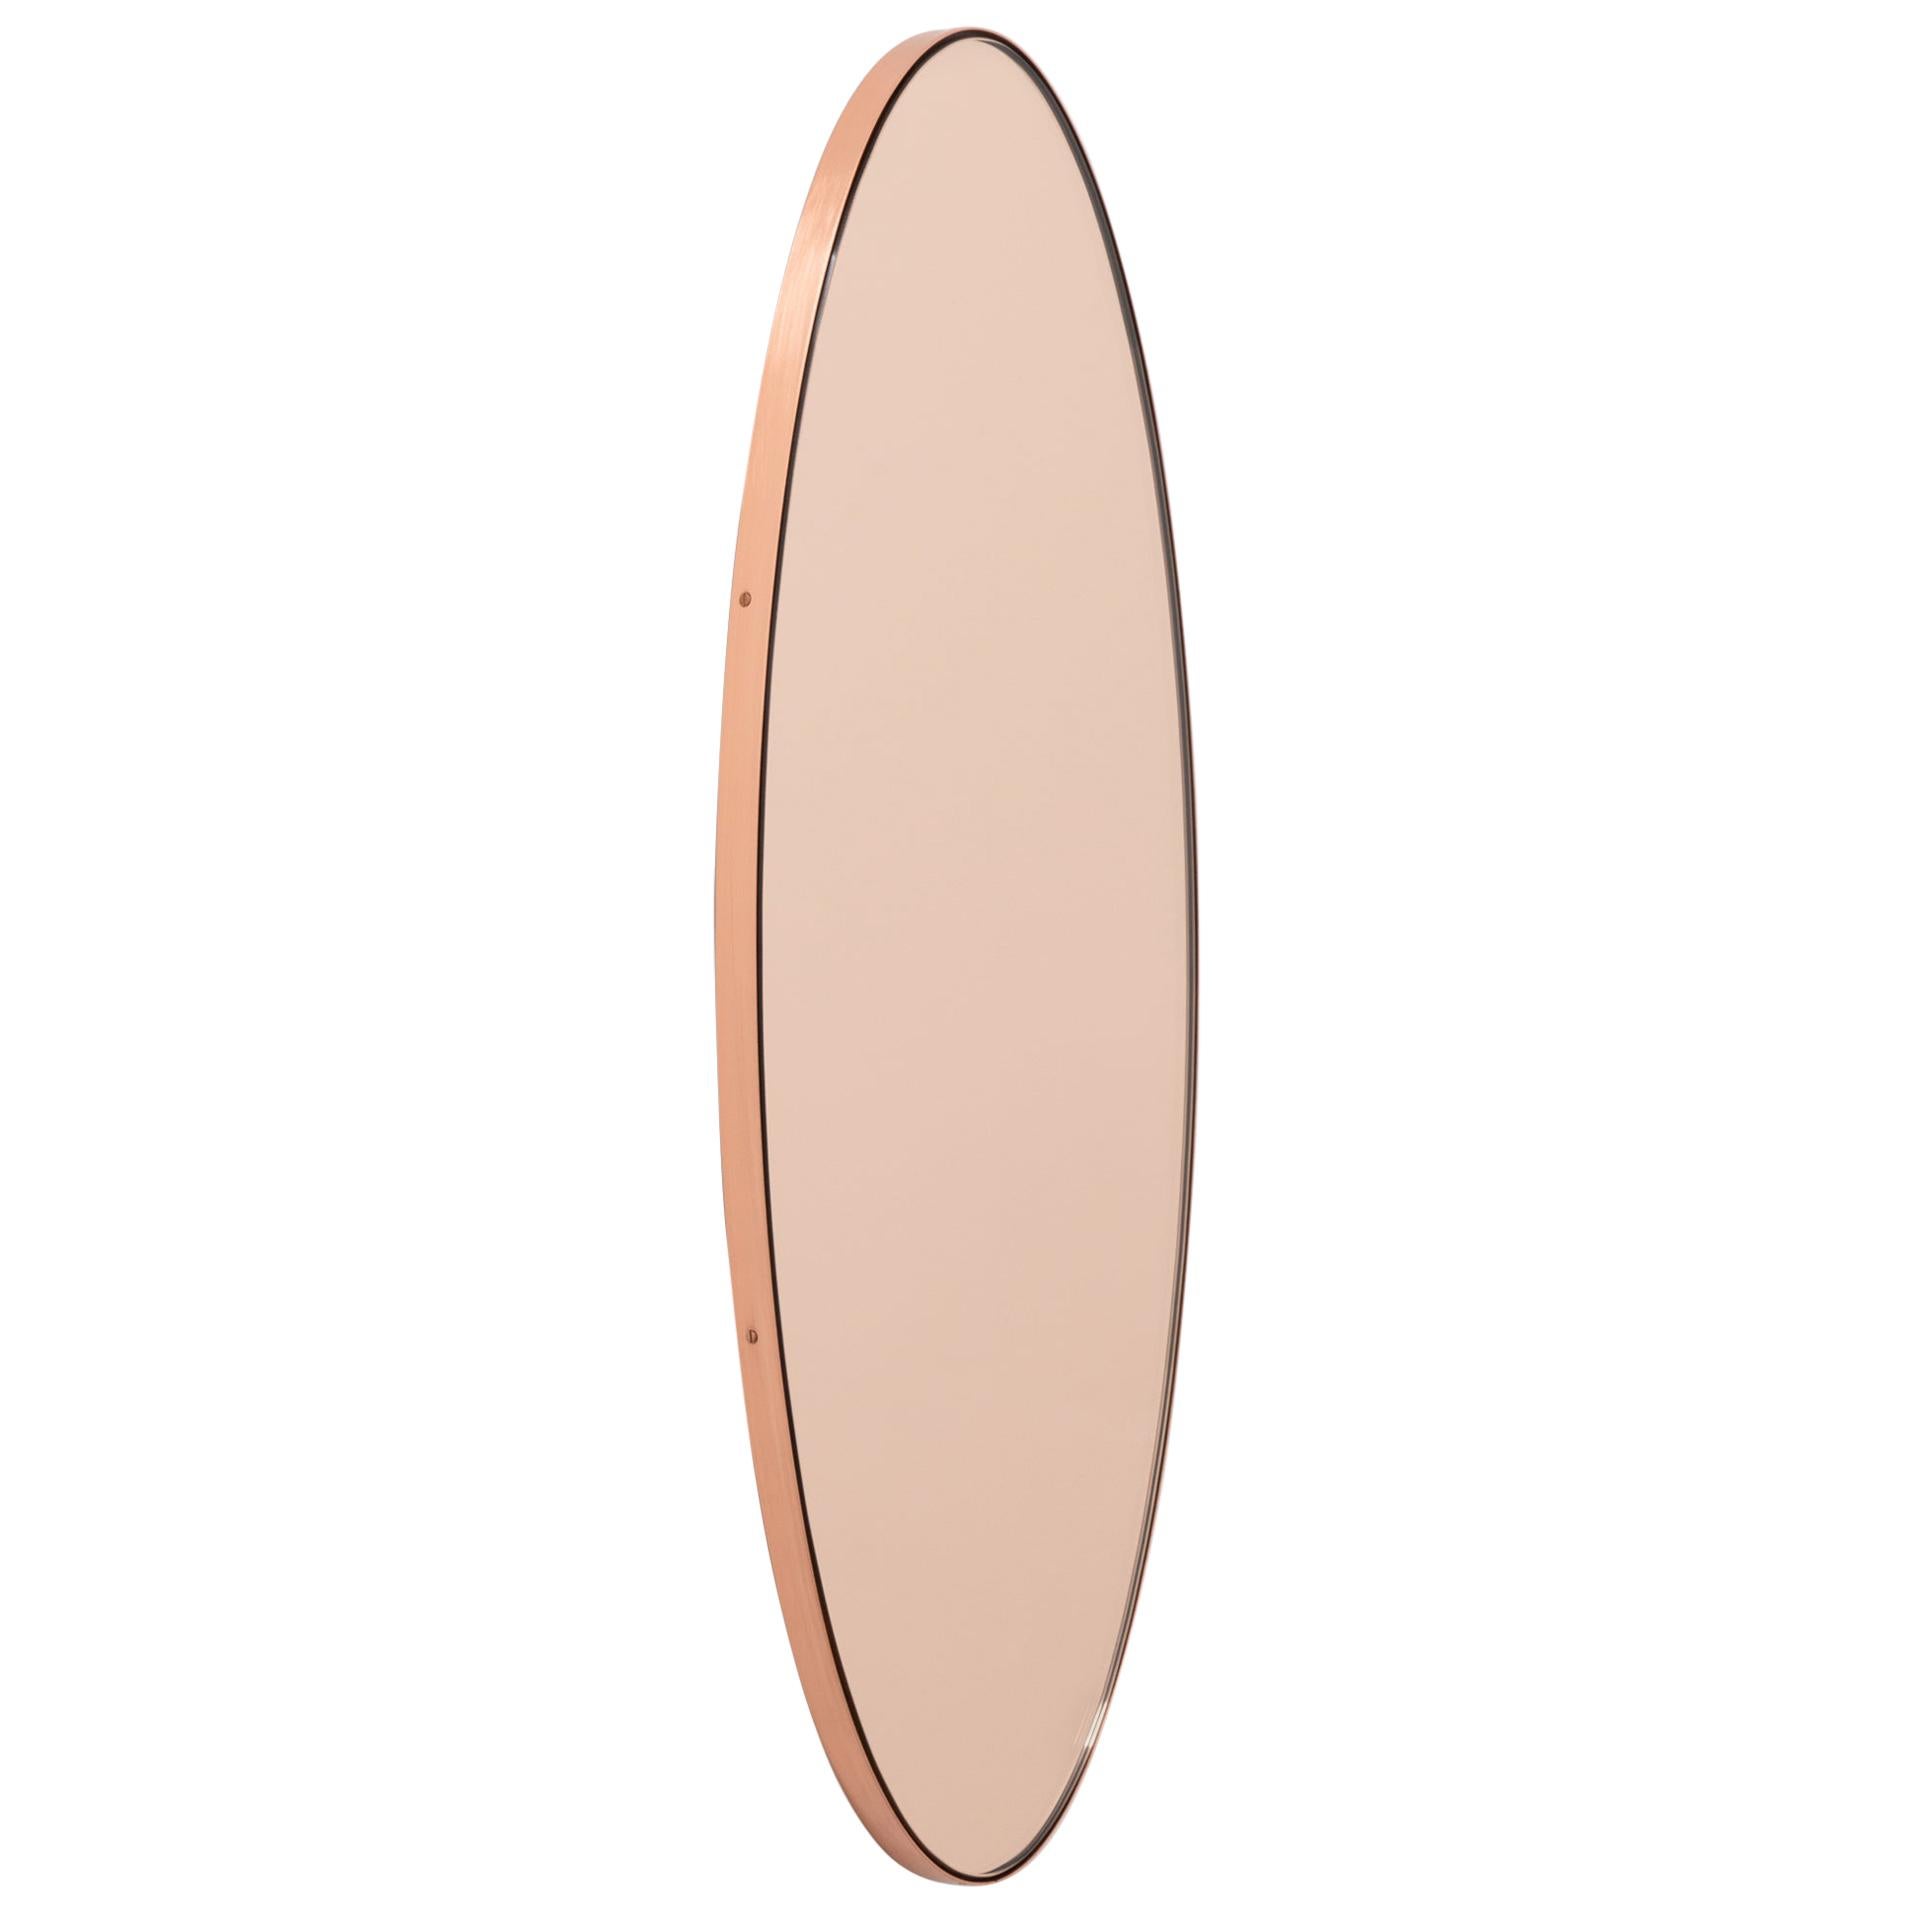 Ovalis Oval shaped Rose Gold Contemporary Mirror with a Copper Frame, Small